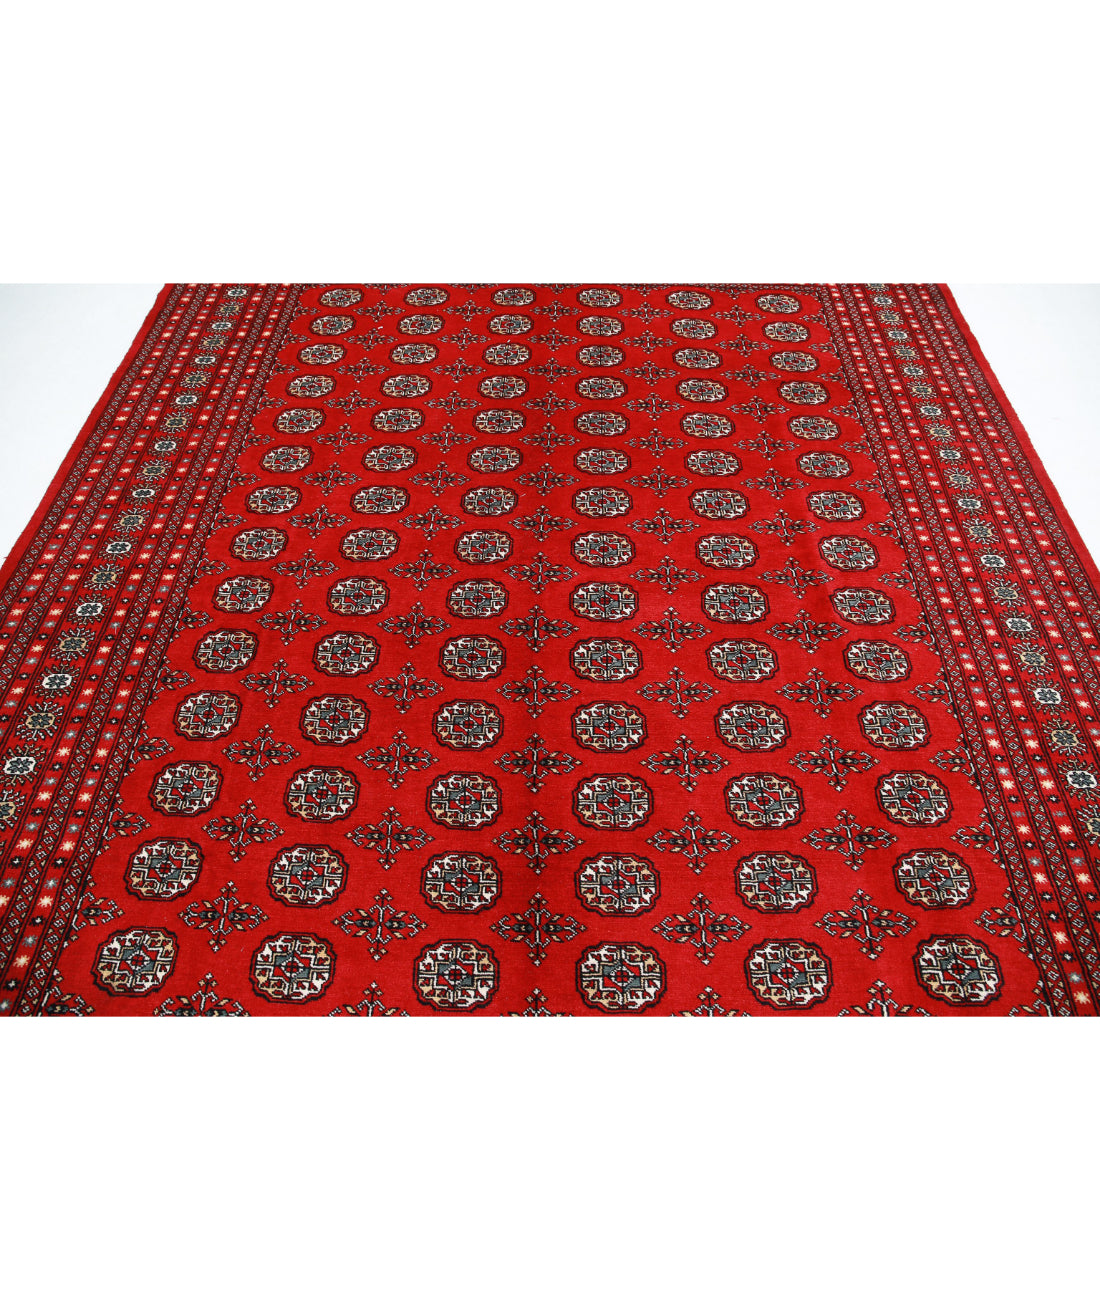 Hand Knotted Tribal Bokhara Wool Rug - 8'1'' x 10'1'' 8'1'' x 10'1'' (243 X 303) / Red / Blue